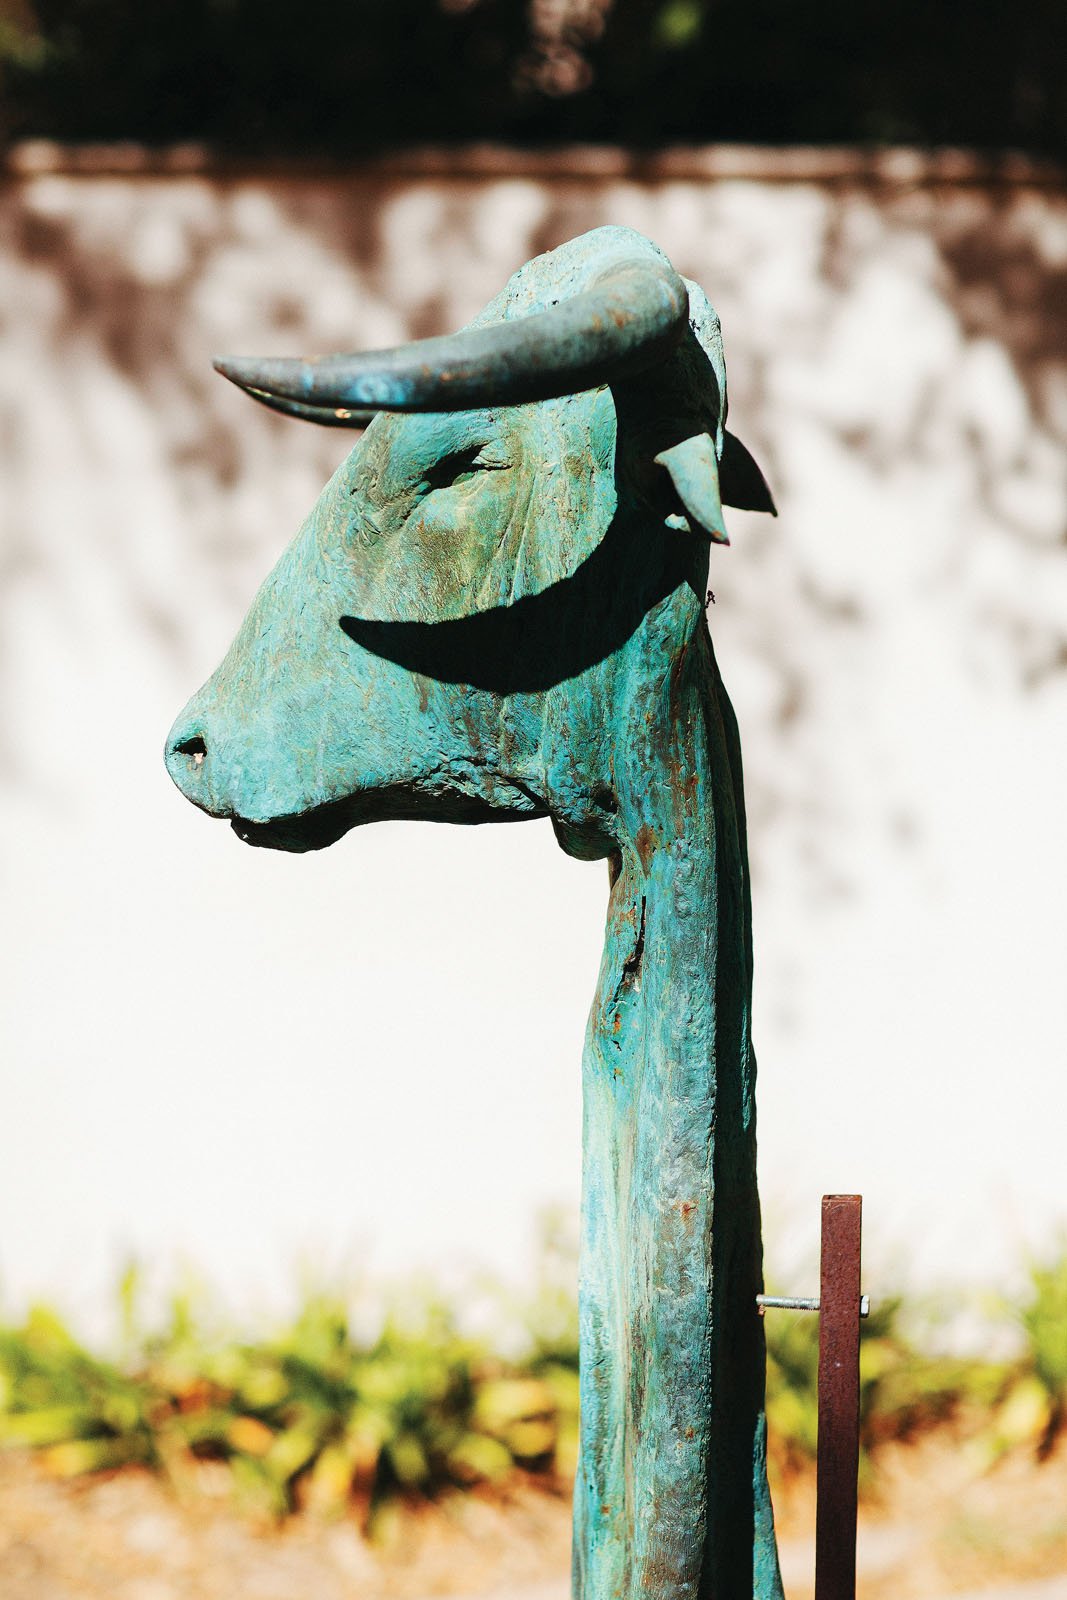   Marcado , a head of a Domecq bull that the artist immortalized in bronze. 